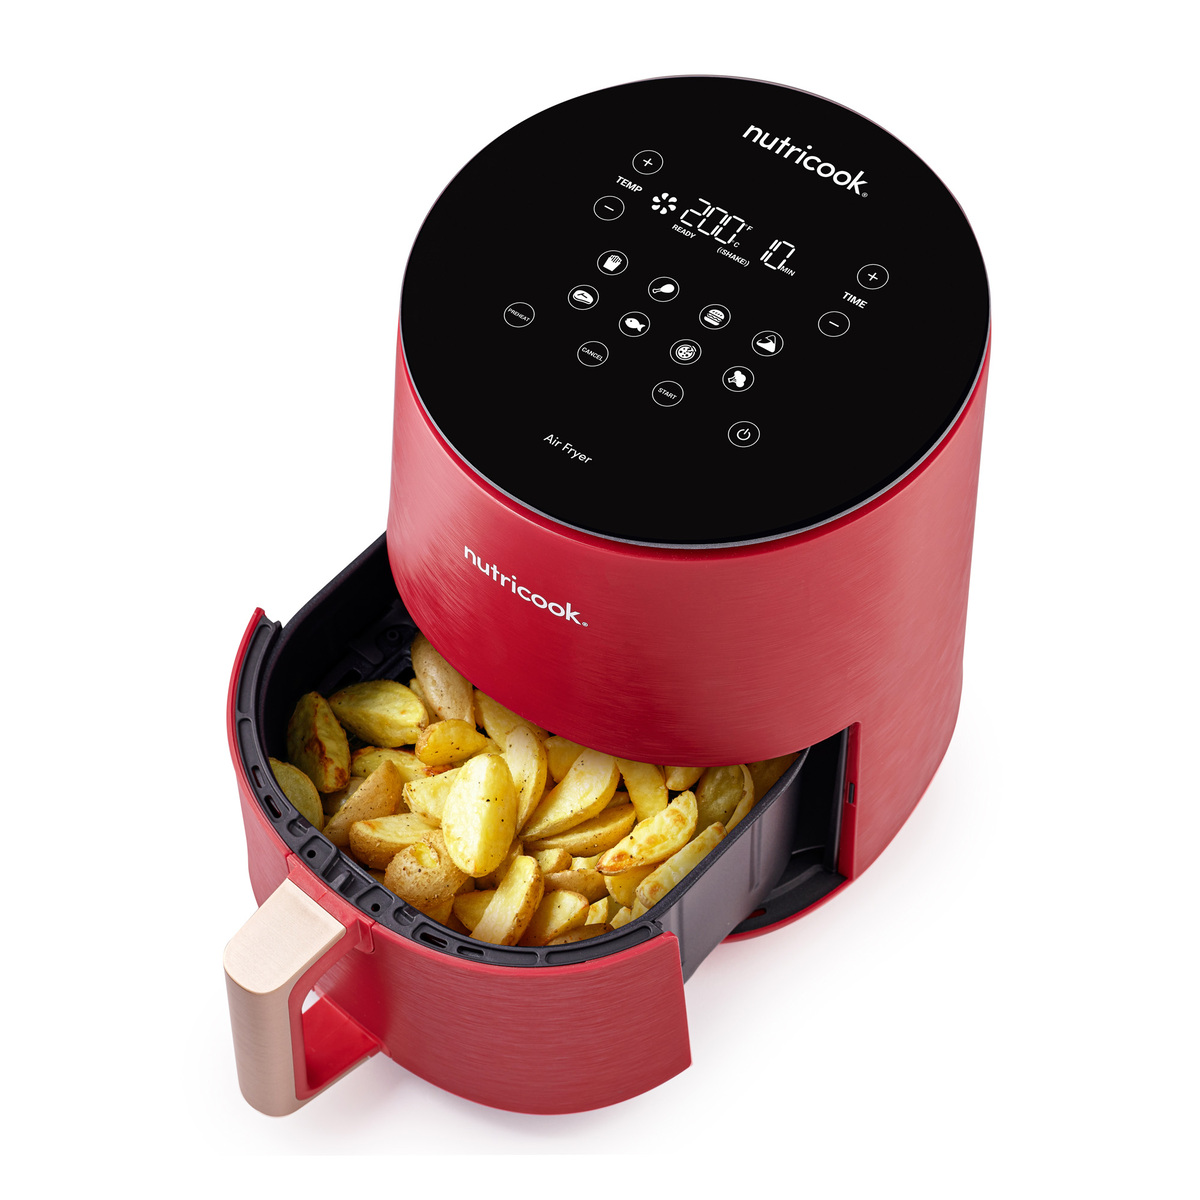 Nutricook Air Fryer Mini 8 Preset Programs with Built-in Preheat Function, 3 L, 1500 W, Red, NC-AF103R